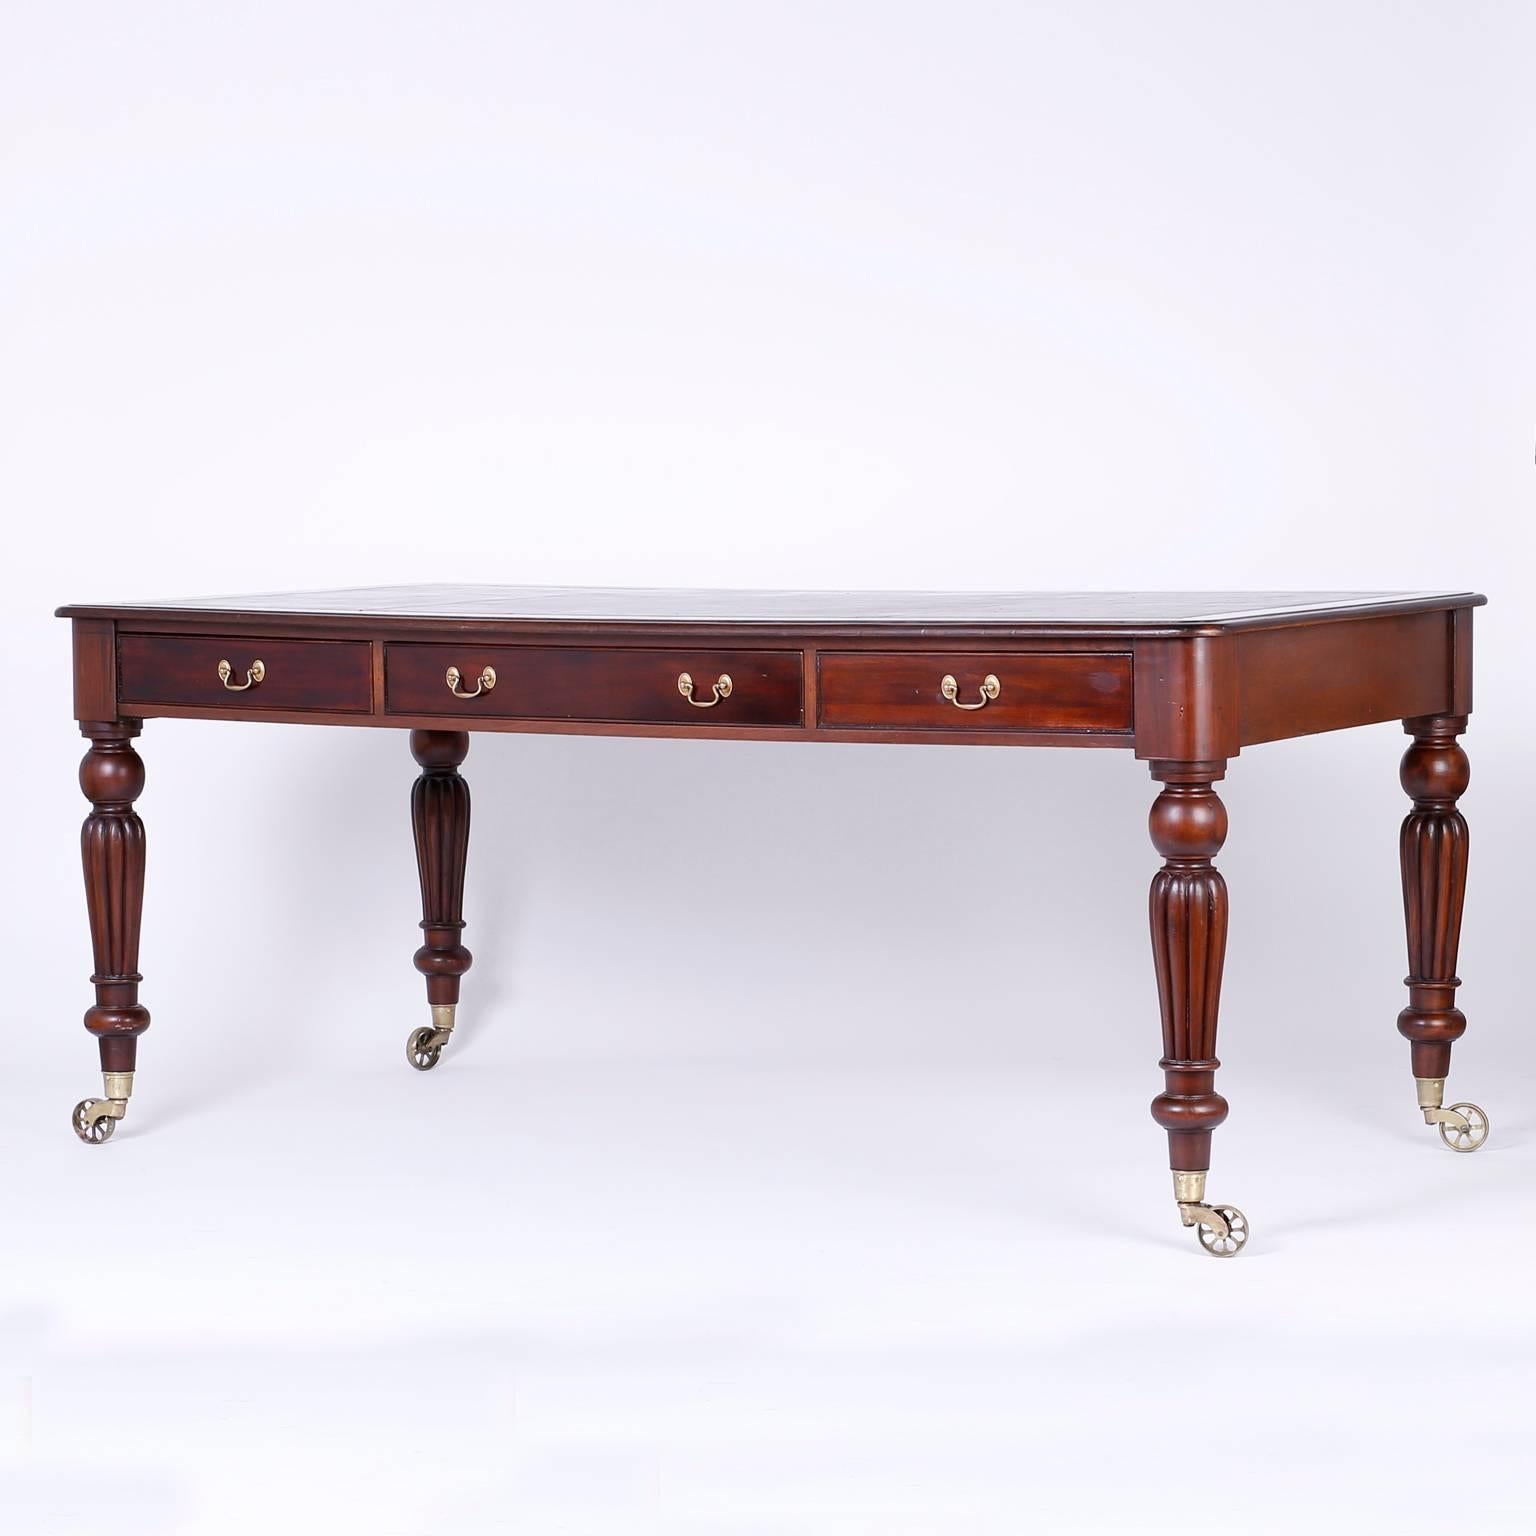 Antique mahogany partners desk or library table in the William IV manner, with a lush tooled brown leather top, three drawers with brass hardware on each side, turned and beaded legs and all-over Industrial style brass wheels. 

             